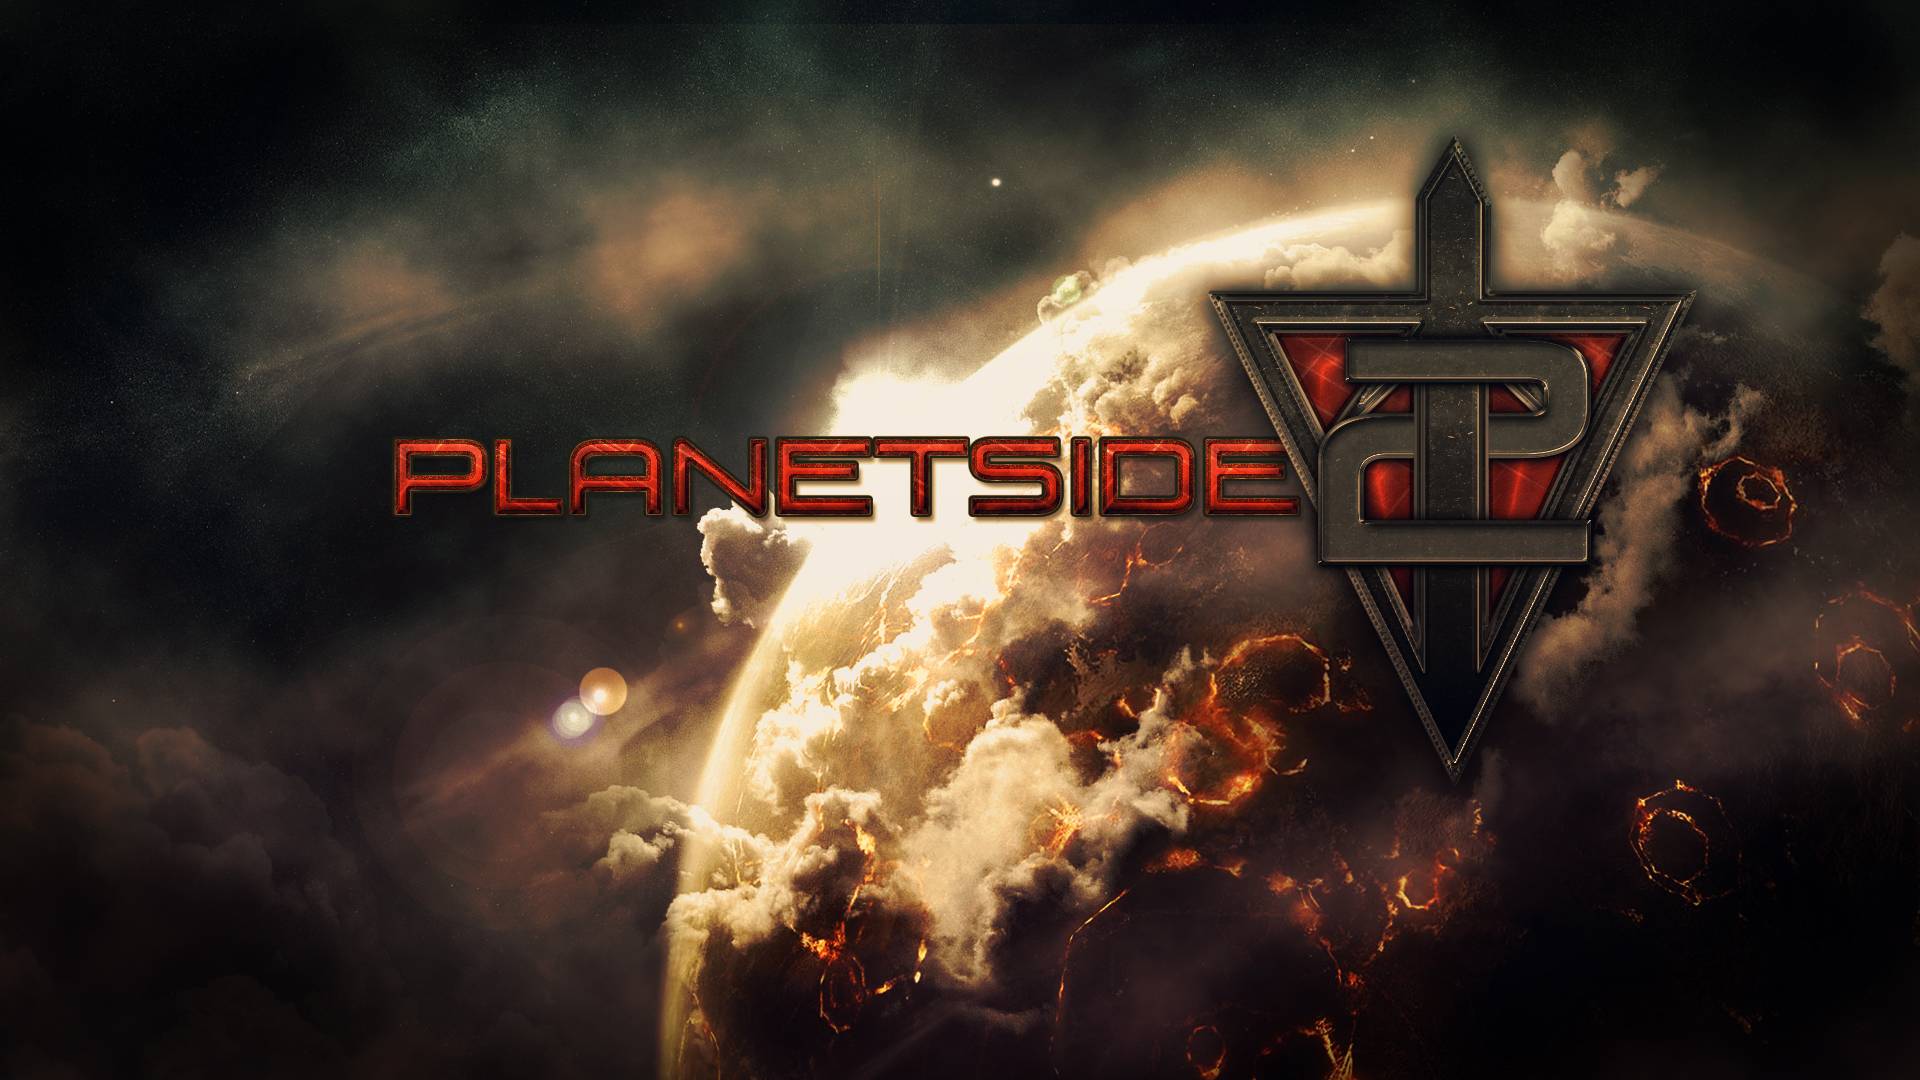 Planetside 2 Ps4 Will Have Visuals On Par With A High End Pc Will Be Using Dualshock 4 Features